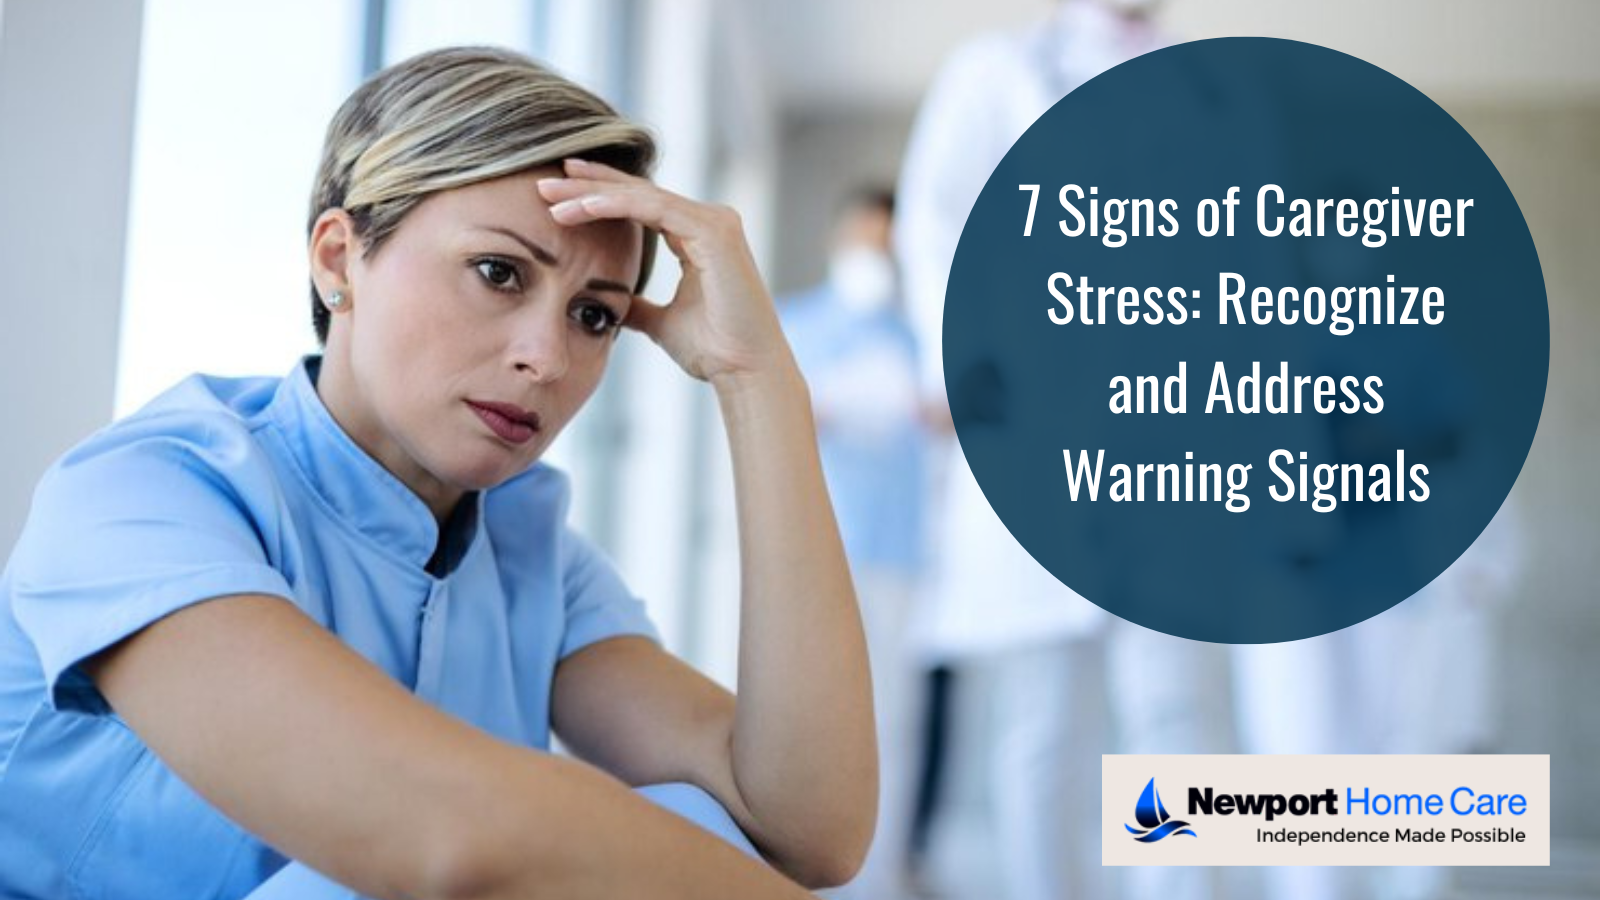 7 Signs of Caregiver Stress: Recognize and Address Warning Signals